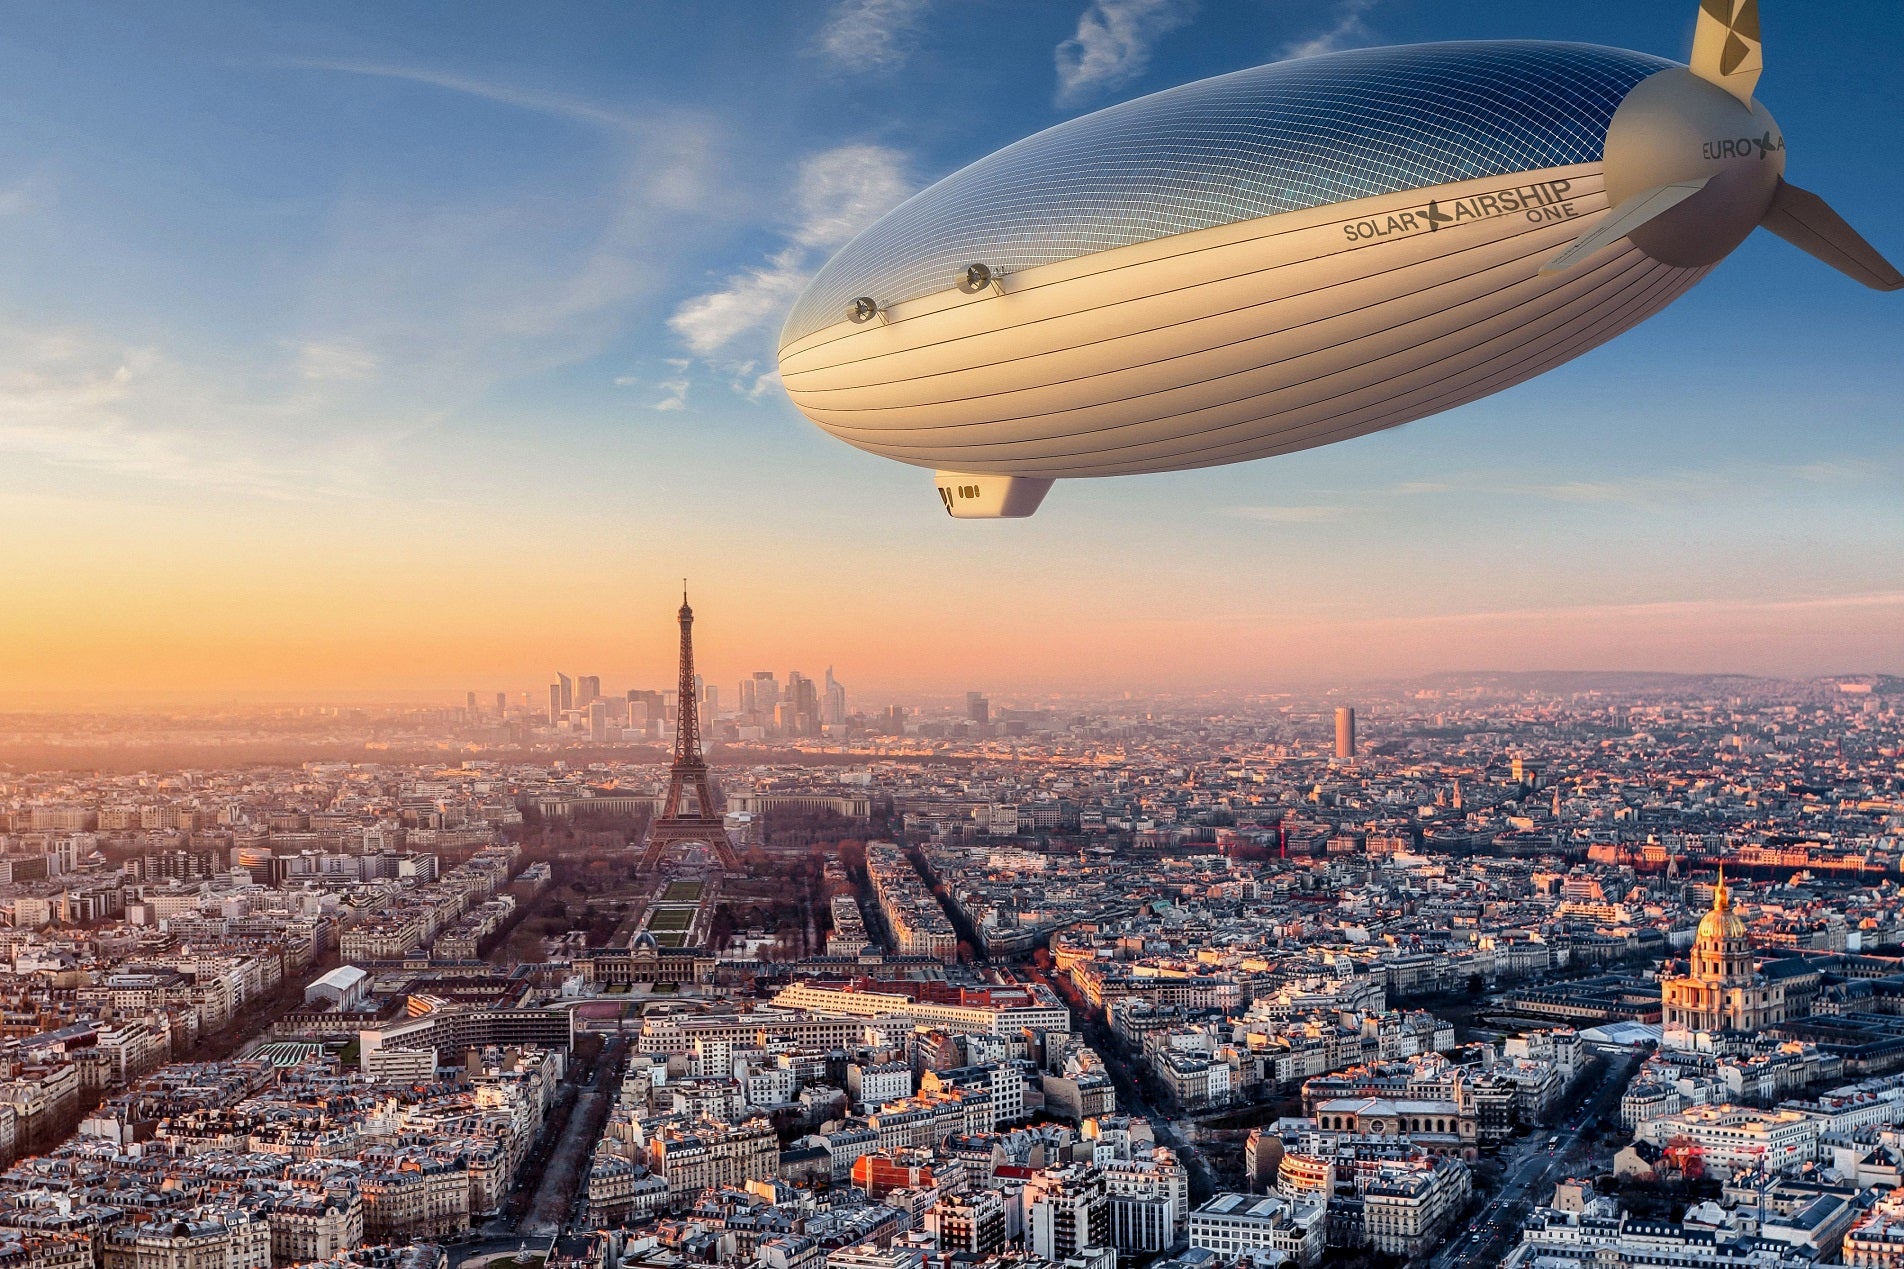 The Solar Airship One is a rigid airship powered by solar energy and hydrogen